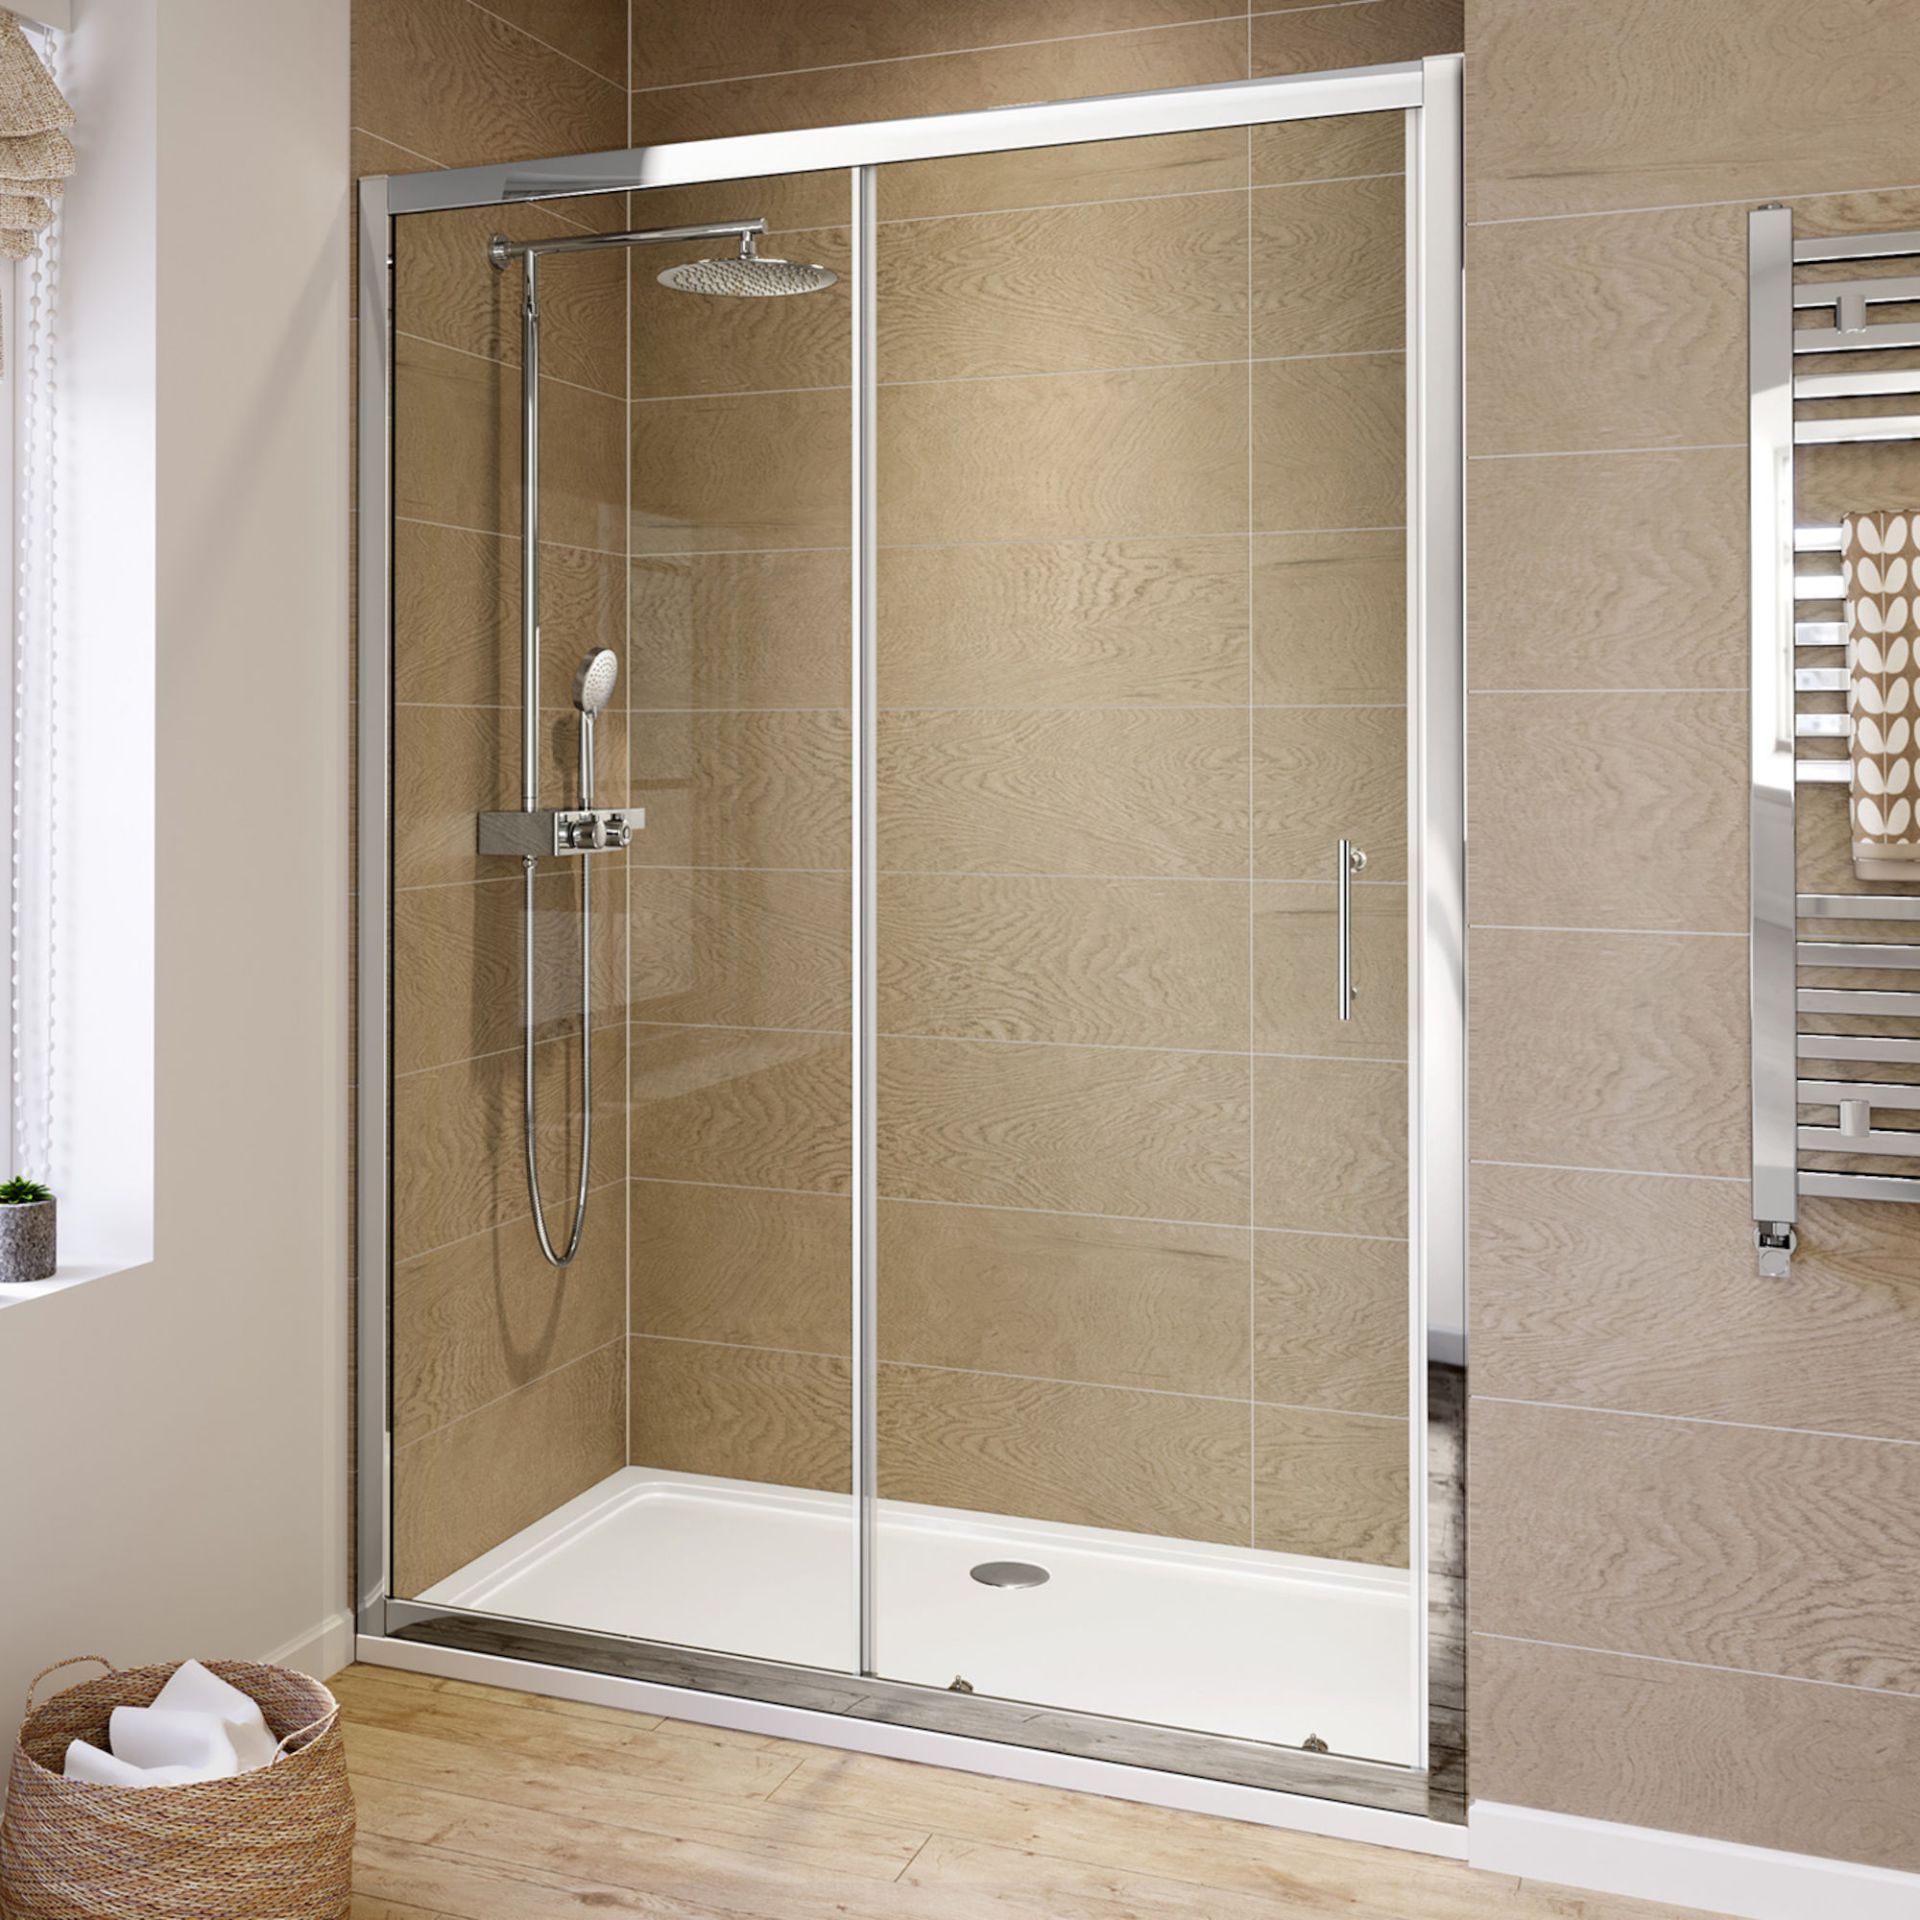 NEW & BOXED 1700mm - 6mm - Elements Sliding Shower Door. RRP £299.99.6mm Safety Glass Fully